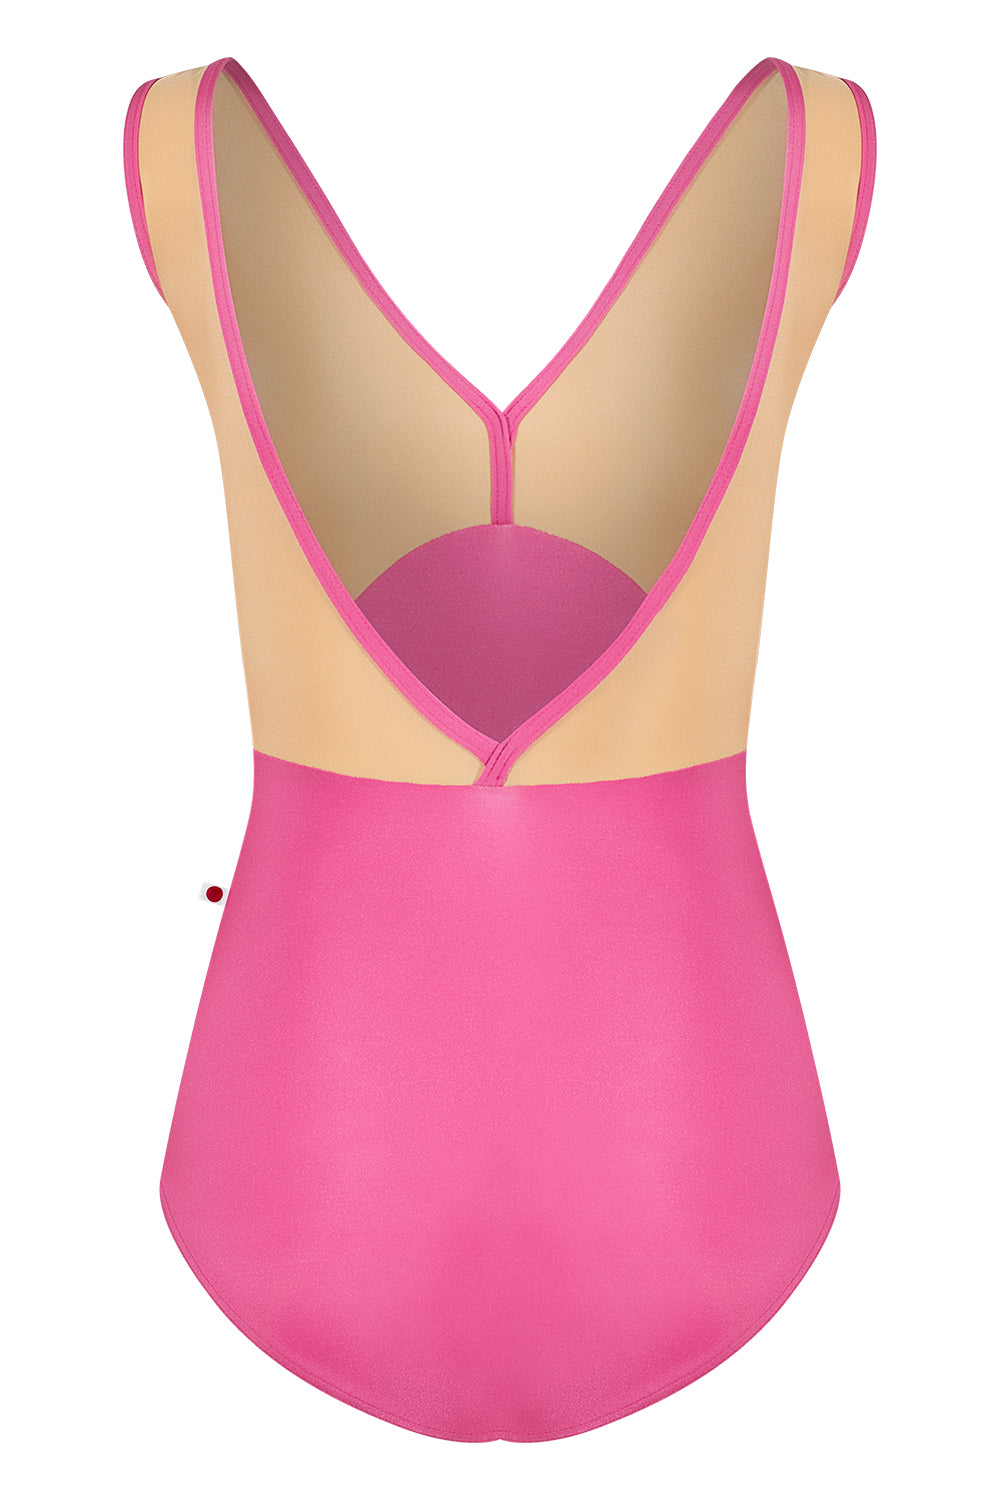 Alicia leotard in N-Waltz body color with N-Dolce top color and N-Waltz trim color